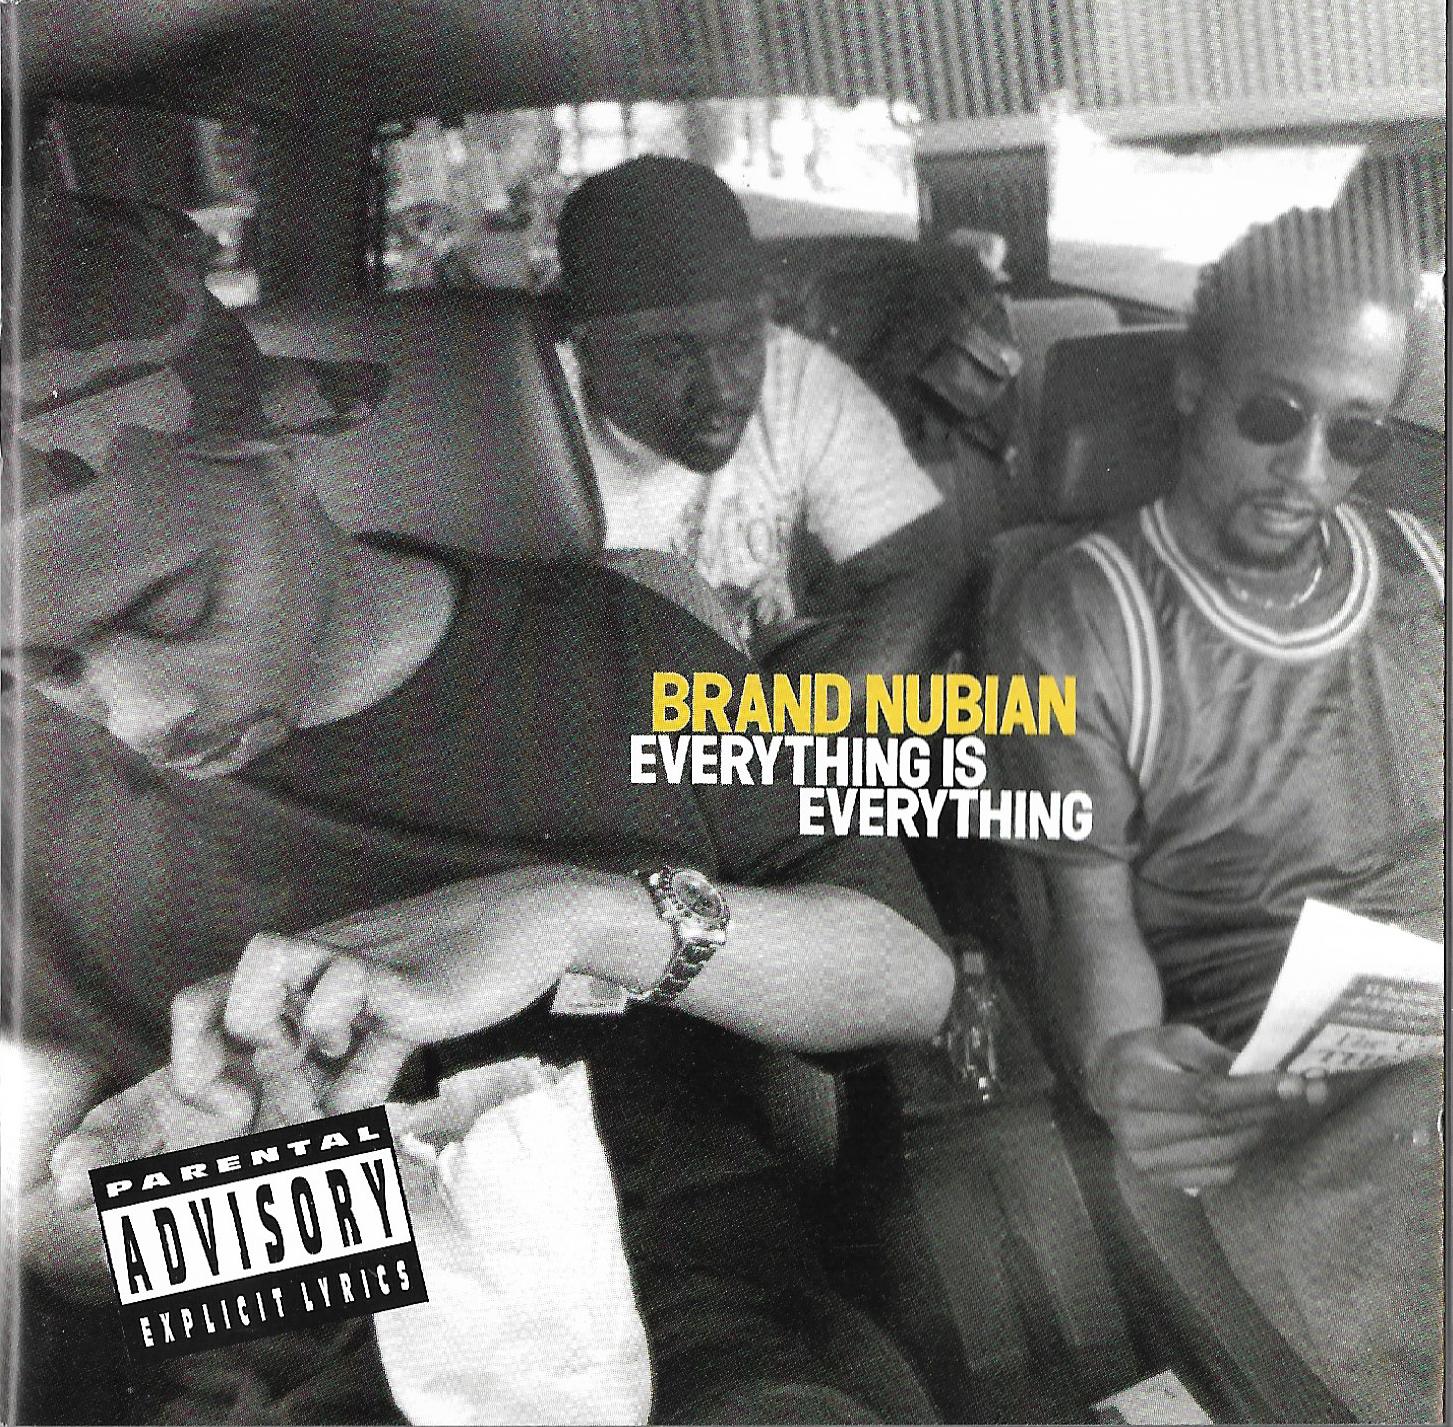 Everything is ones. Brand Nubian everything is everything. Brand Nubian – the brand nu Mixtape. Winning is everything обложка. Vide everything обложка.